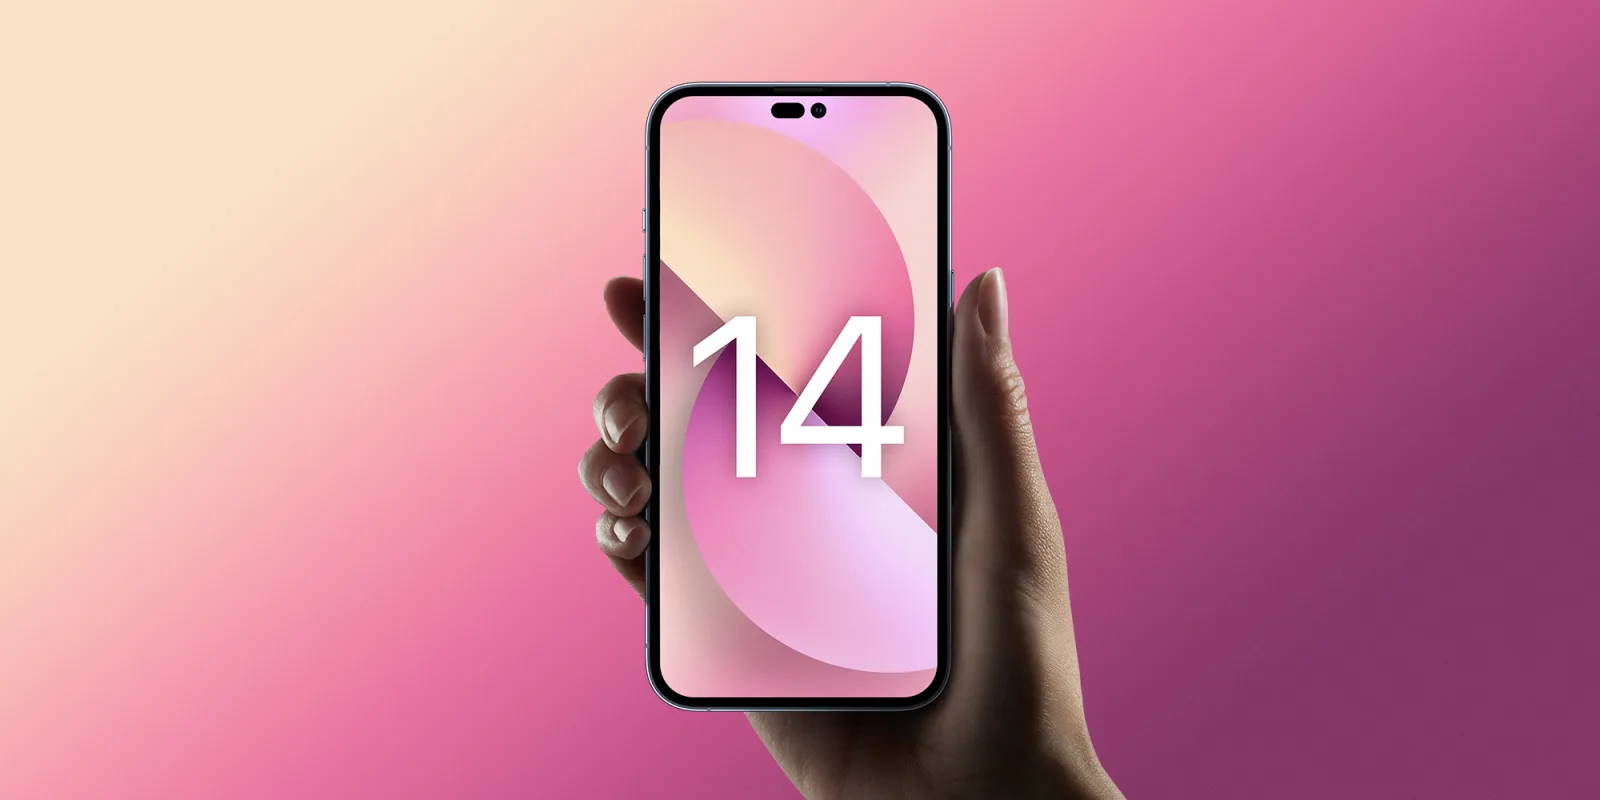 Apple September 2022 Event – We’re not so far from the ‘far out’ iPhone 14 lineup